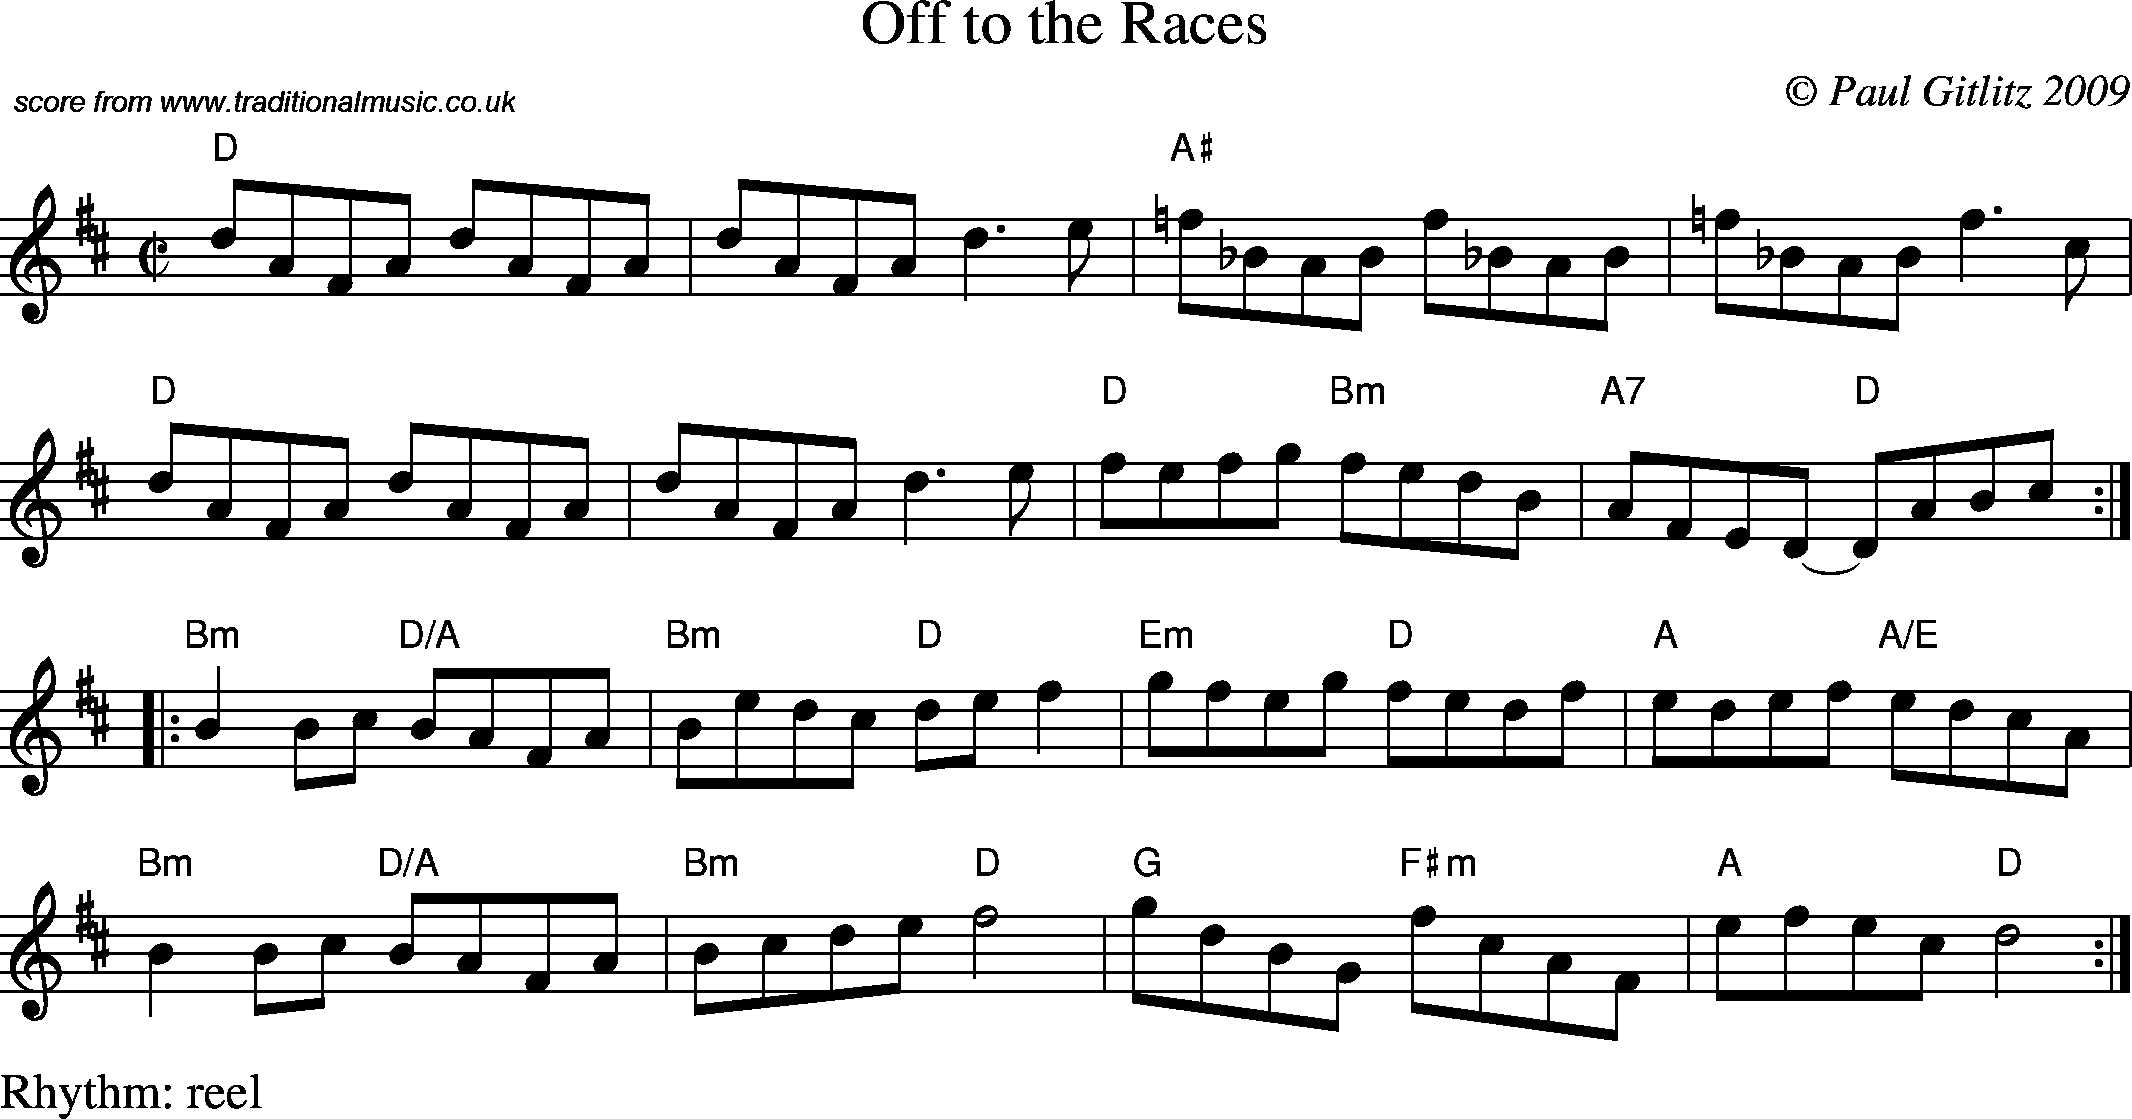 Sheet Music Score for Reel - Off to the Races